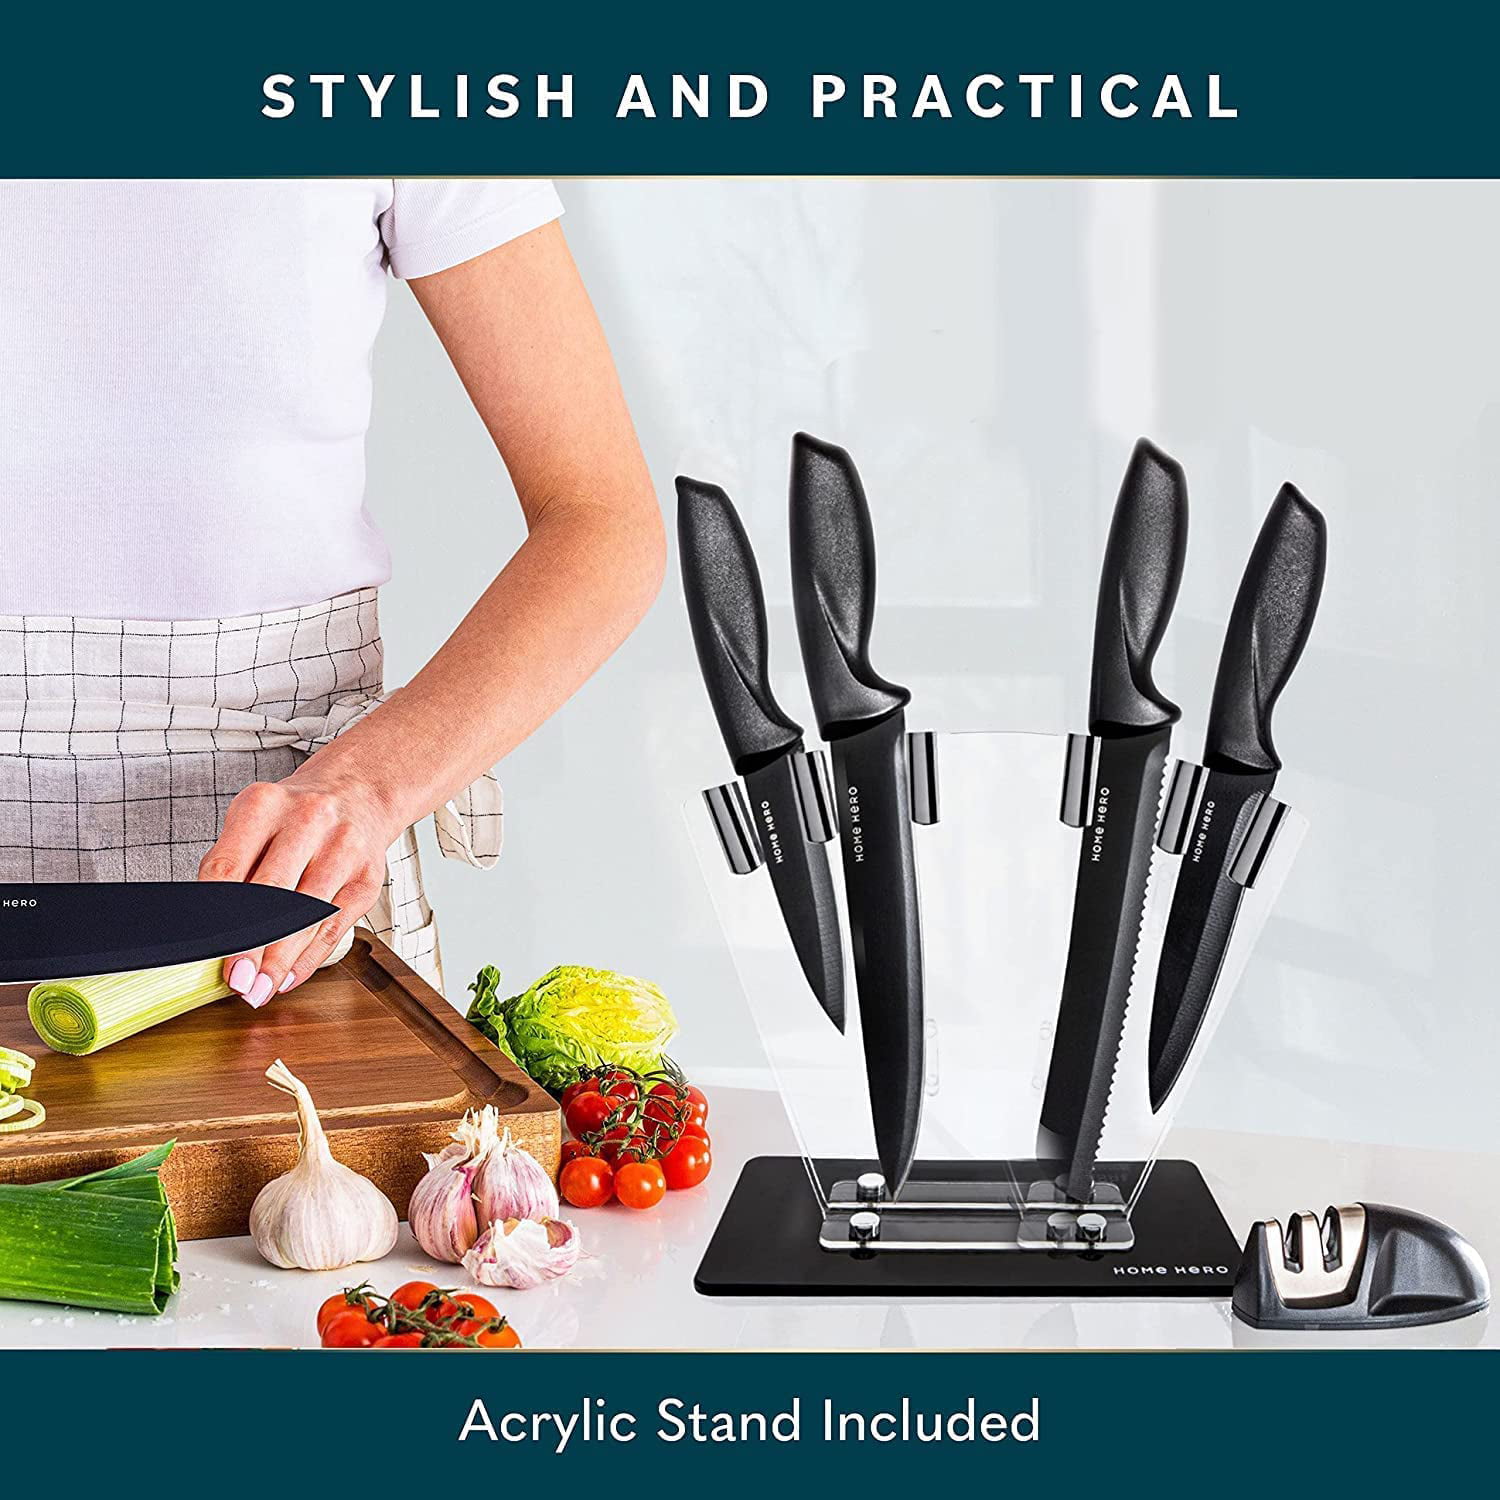 HOME HERO 12 Piece Kitchen Knife Set and Sharpener - INCOMPLETE